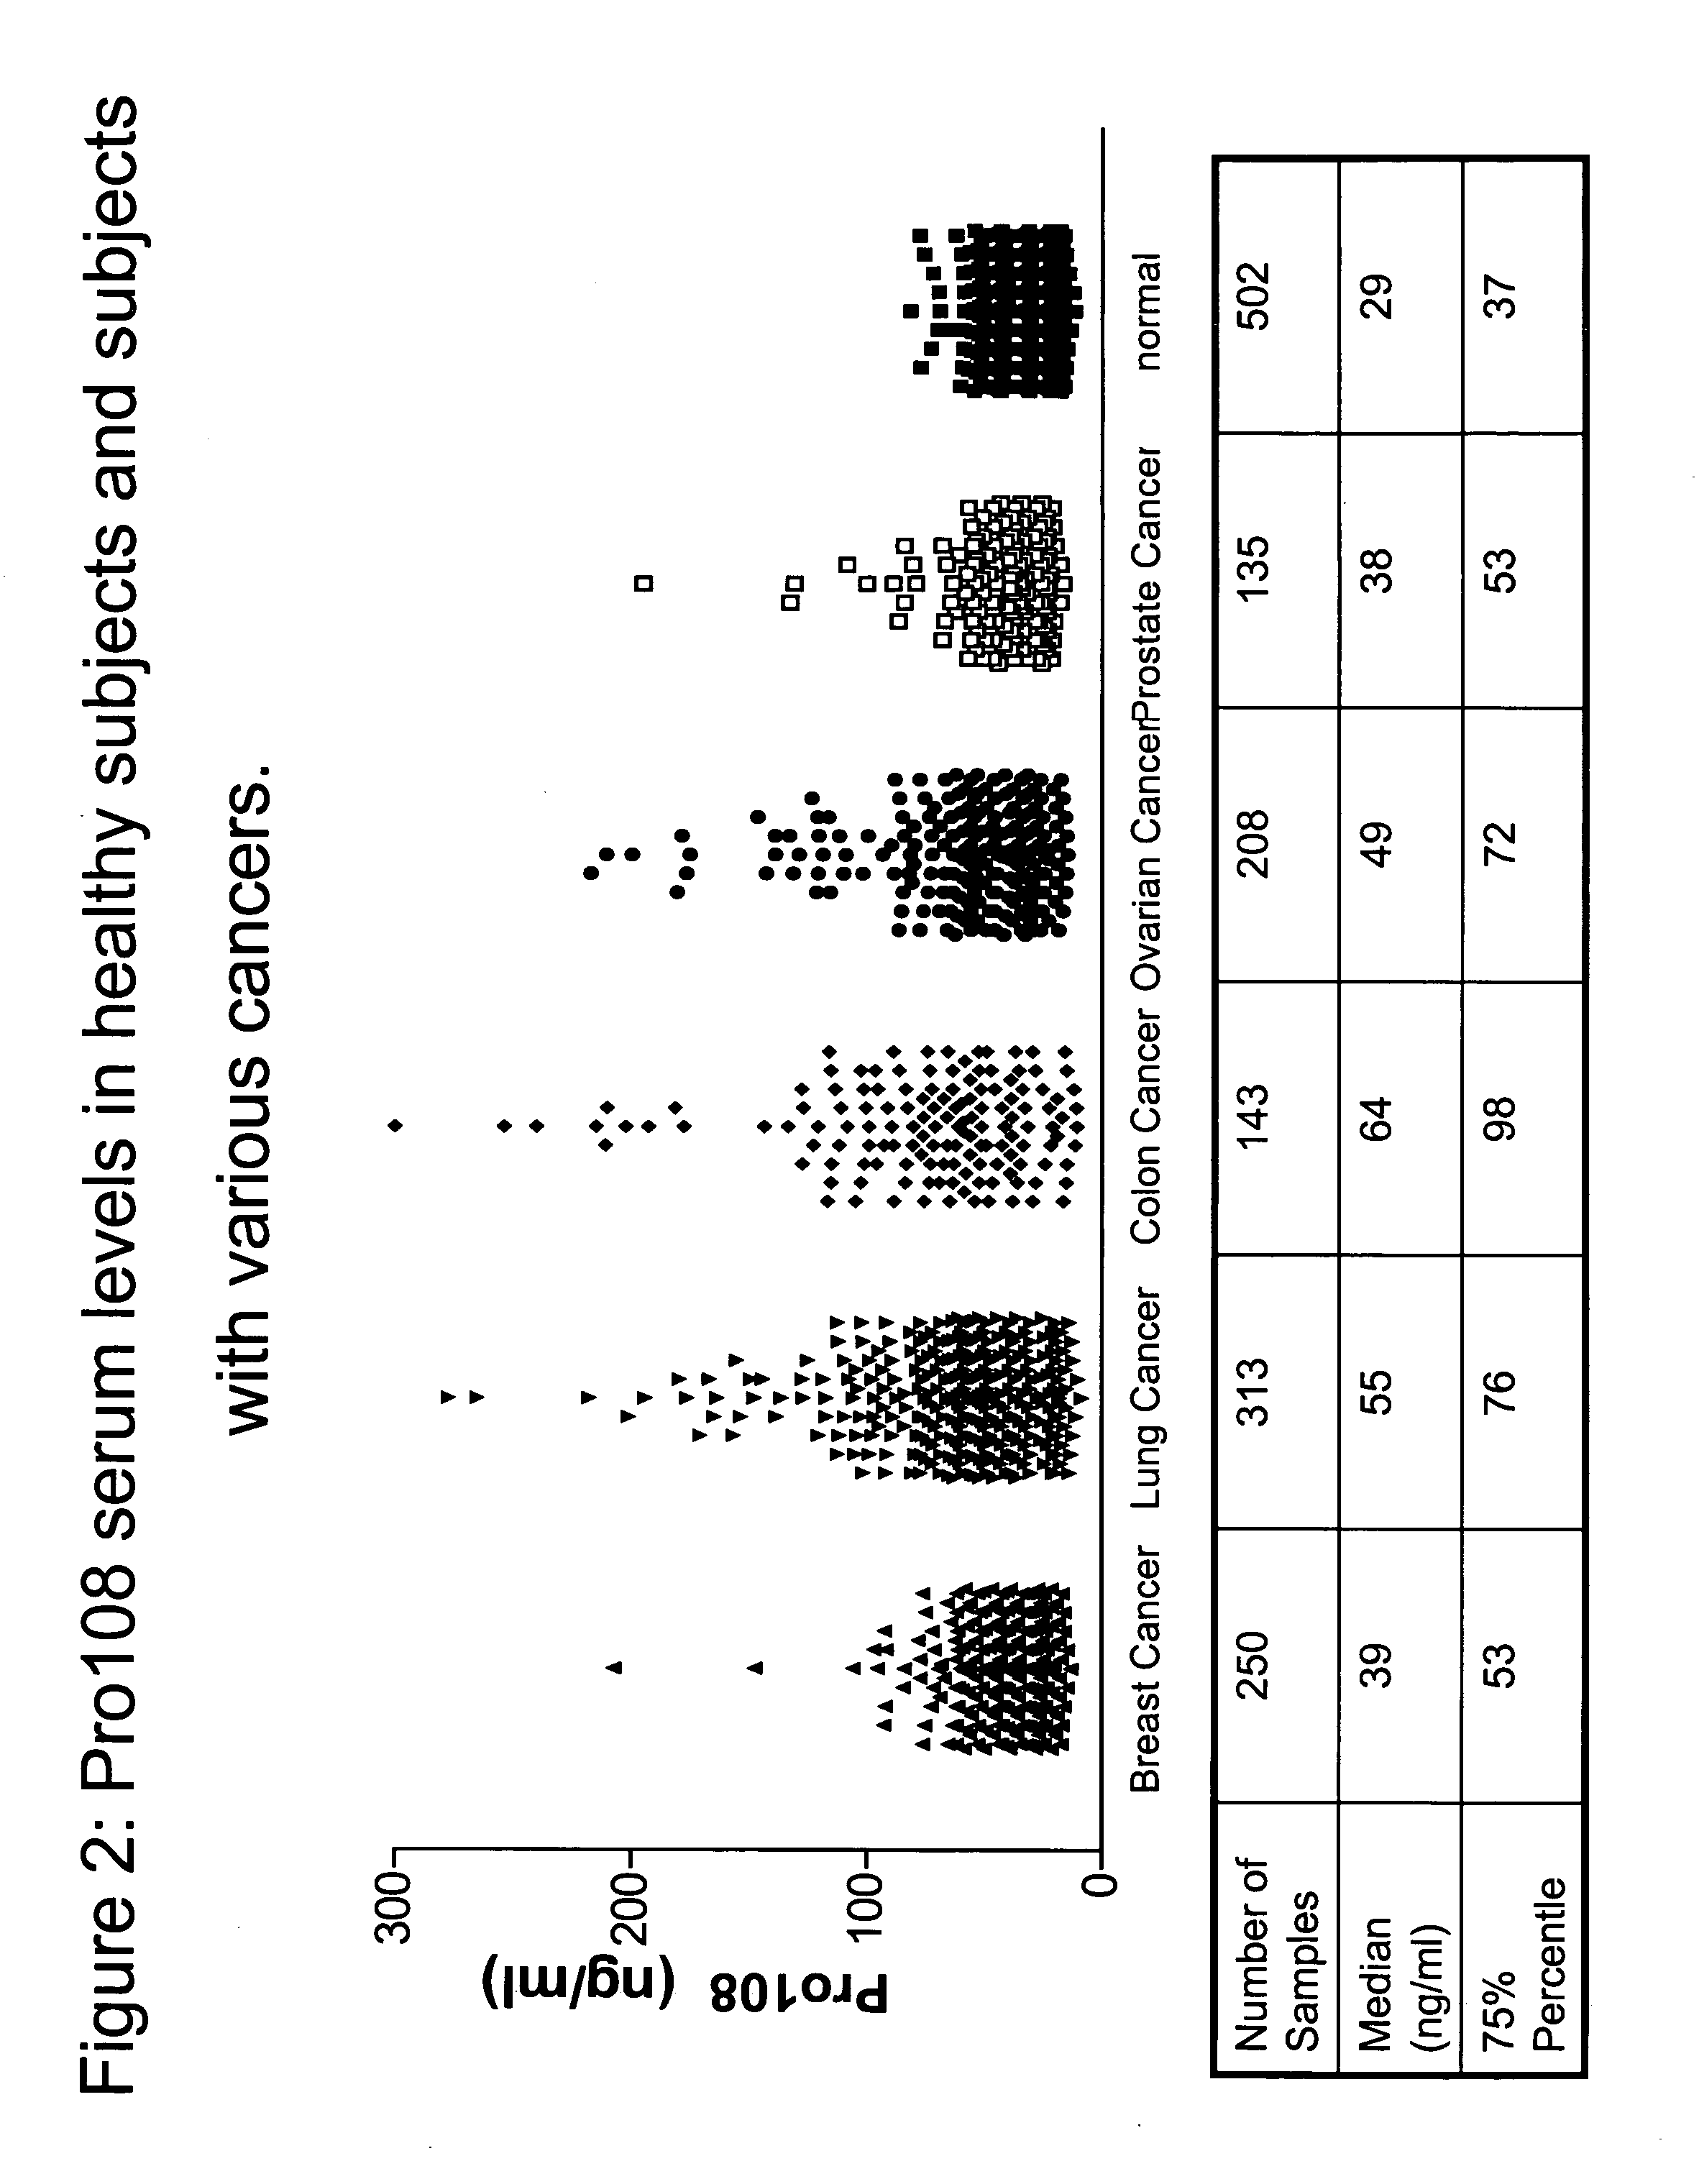 Pro108 antibody compositions and methods of use and use of Pro108 to assess cancer risk